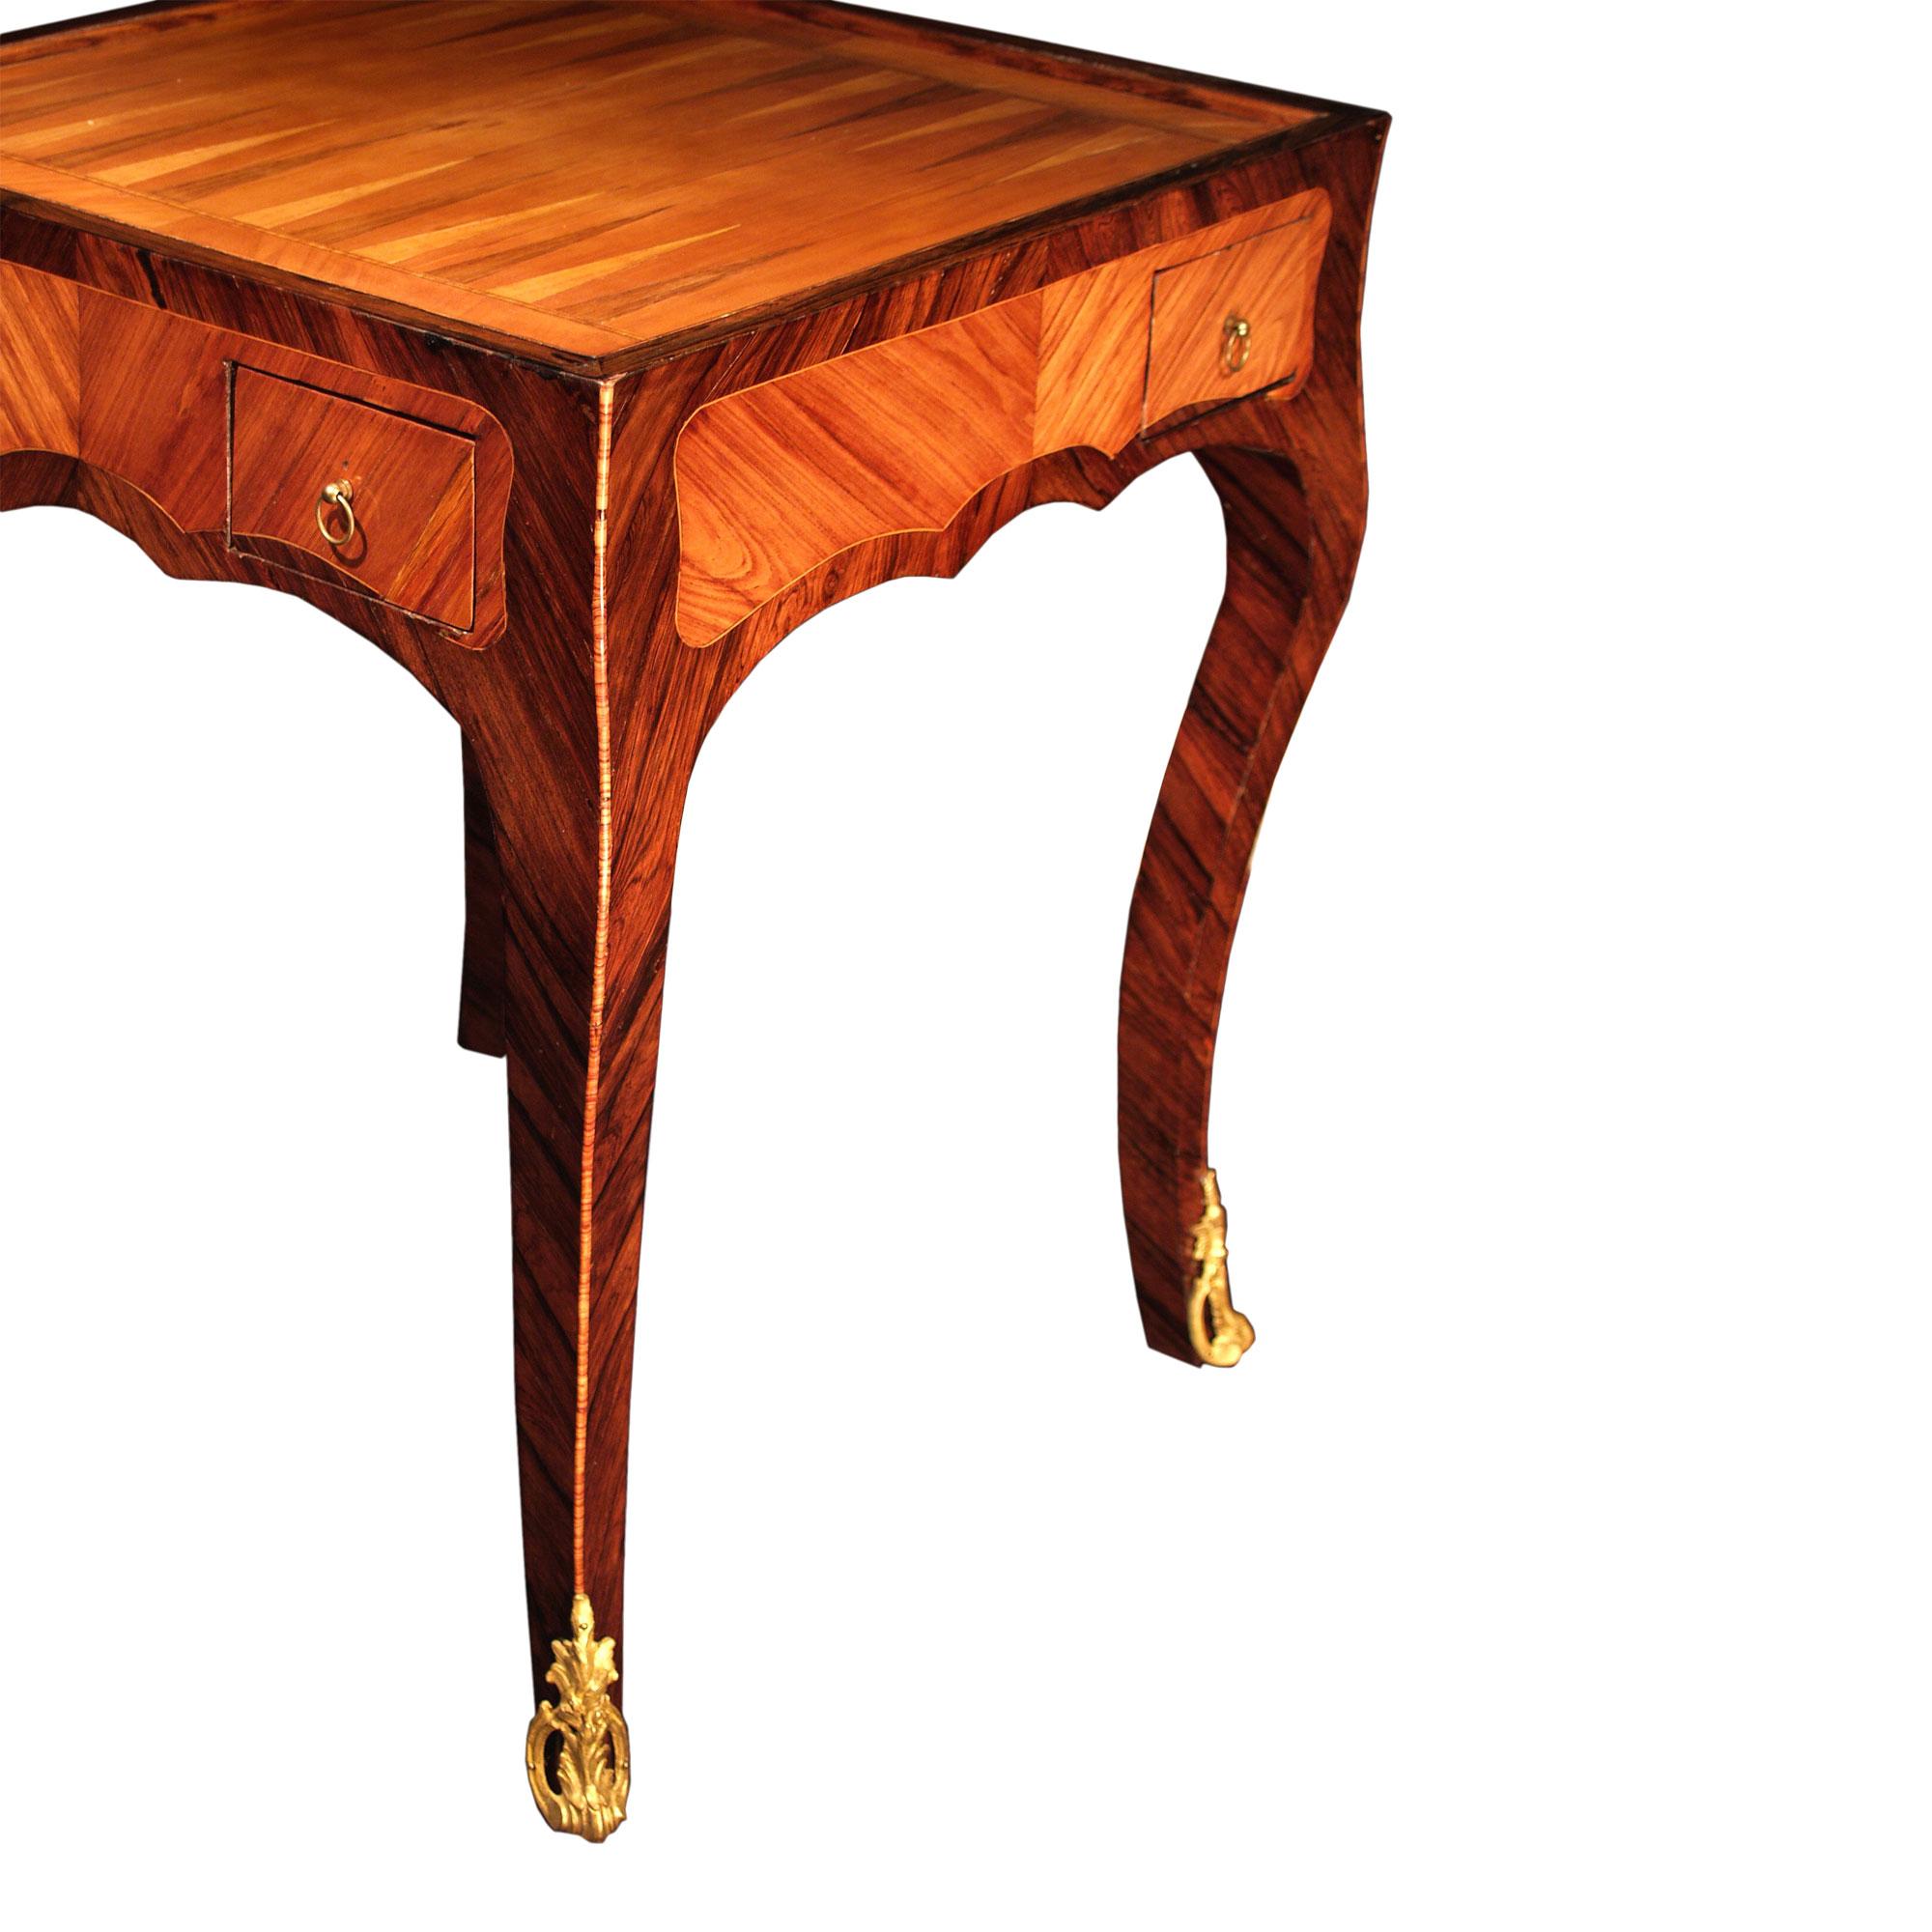 A unique scale French mid 19th century Louis XV st. tulipwood and kingwood marquetry games table. The table is raised on canriole legs with pierced ormolu sabots. At the scalloped frieze are four drawers, one on each side. On top lays a backgammon